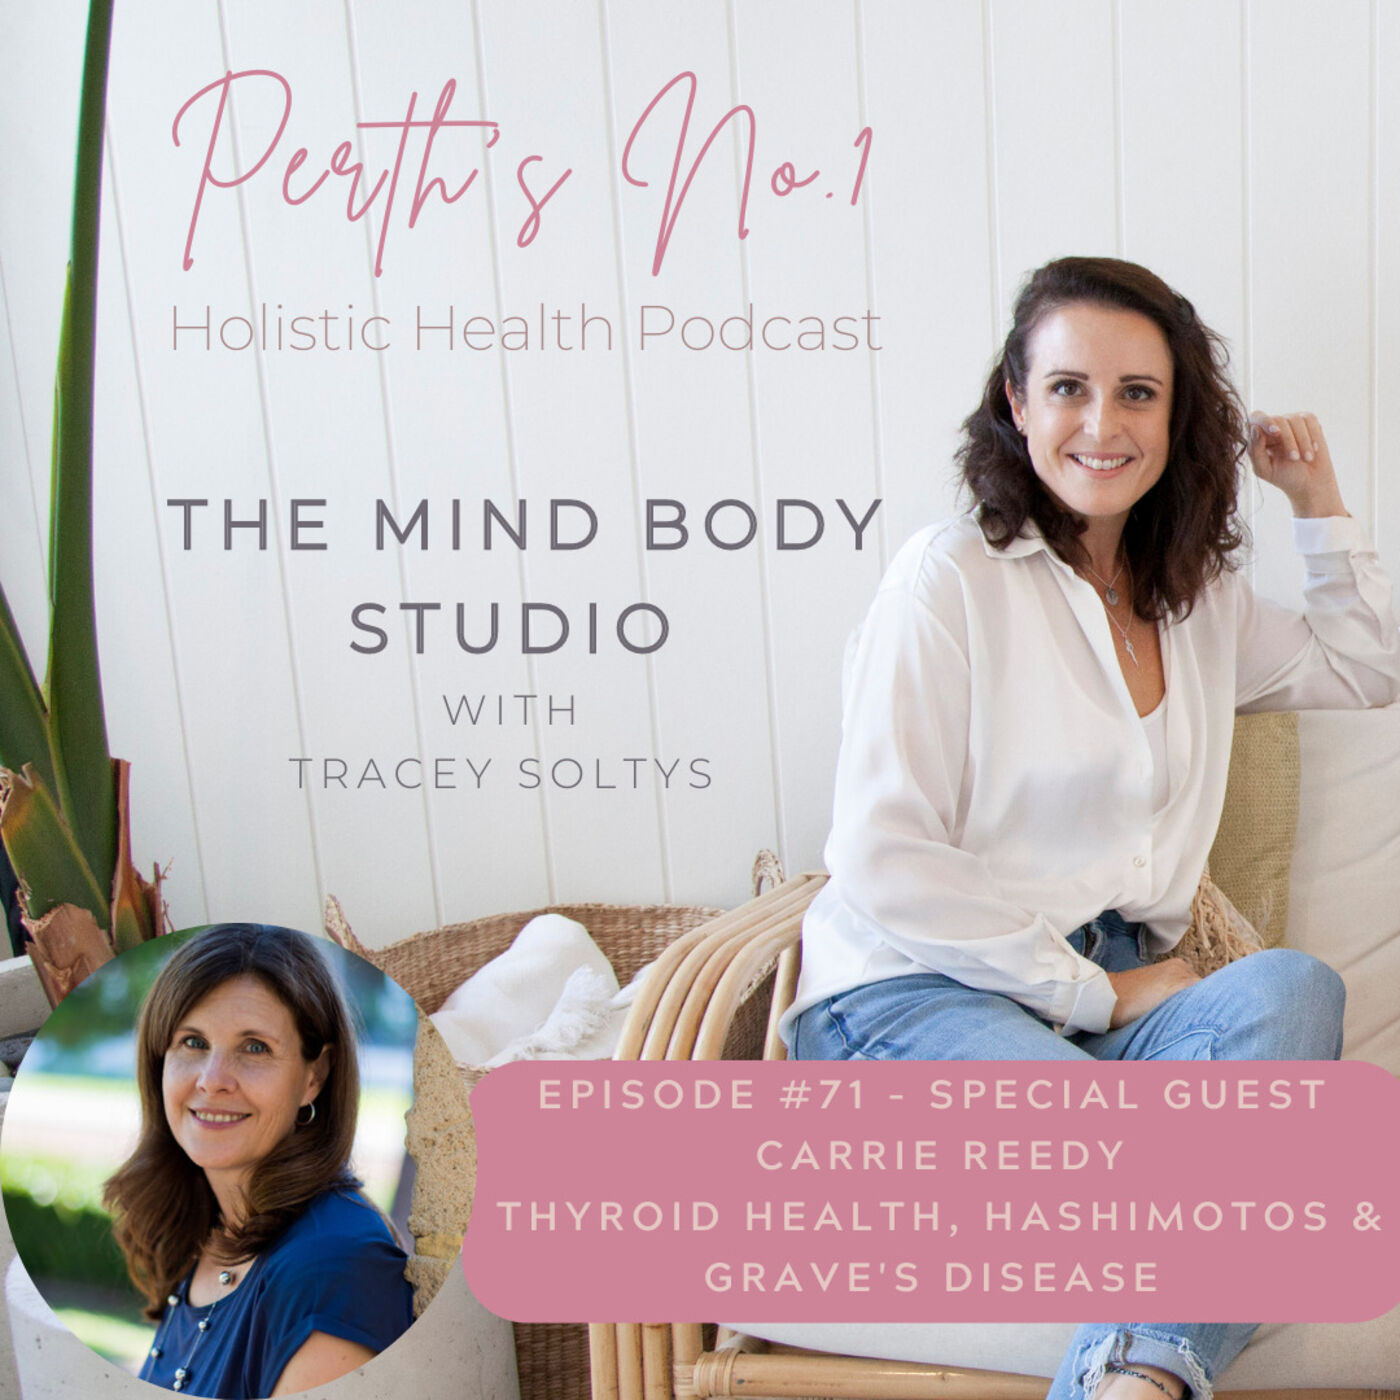 SPECIAL GUEST - Carrie Reedy; Thyroid Health, Hashimotos & Grave's Disease